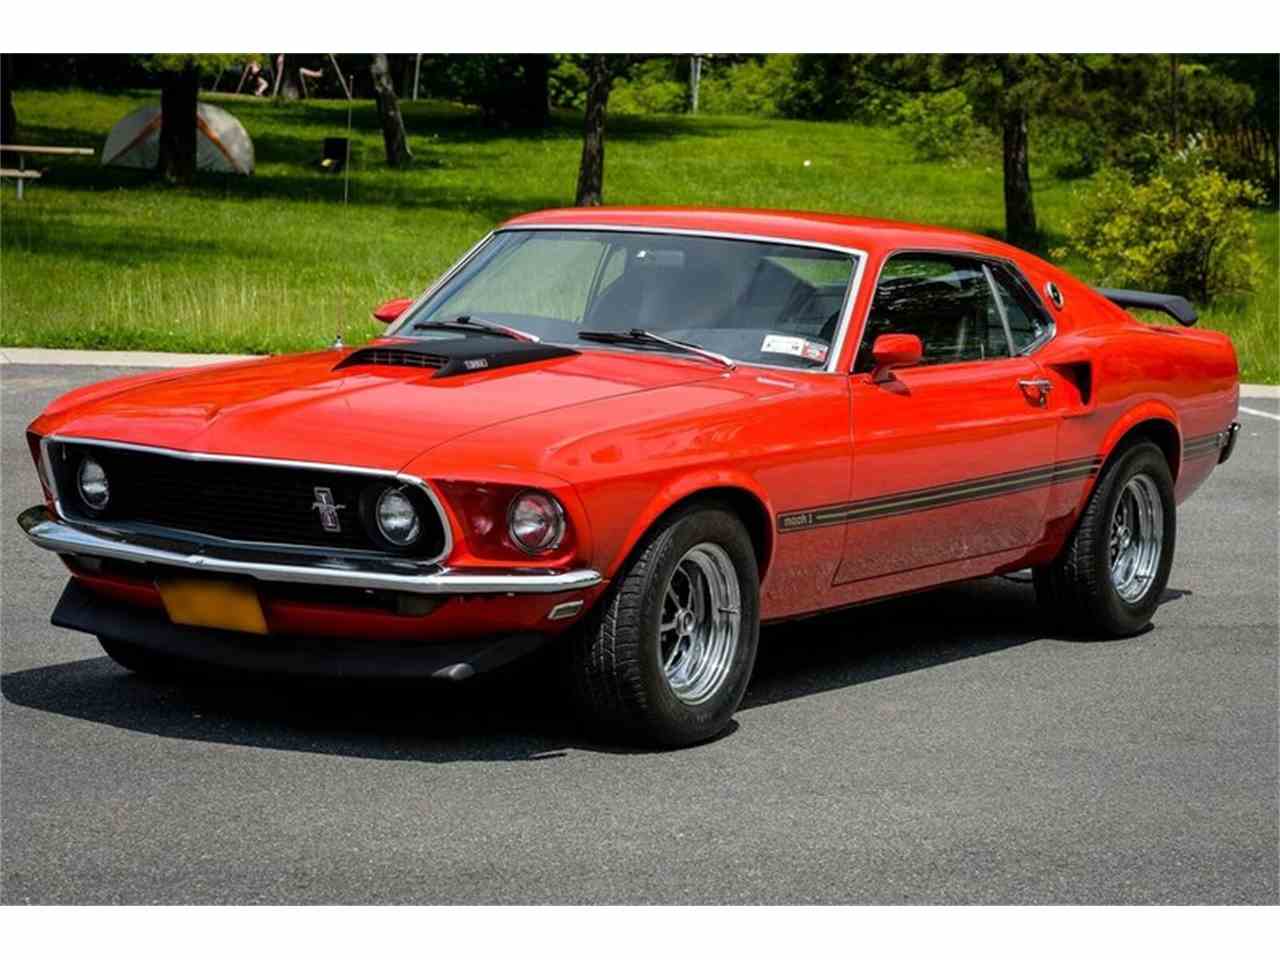 A 1969 Ford Mustang Mach 1